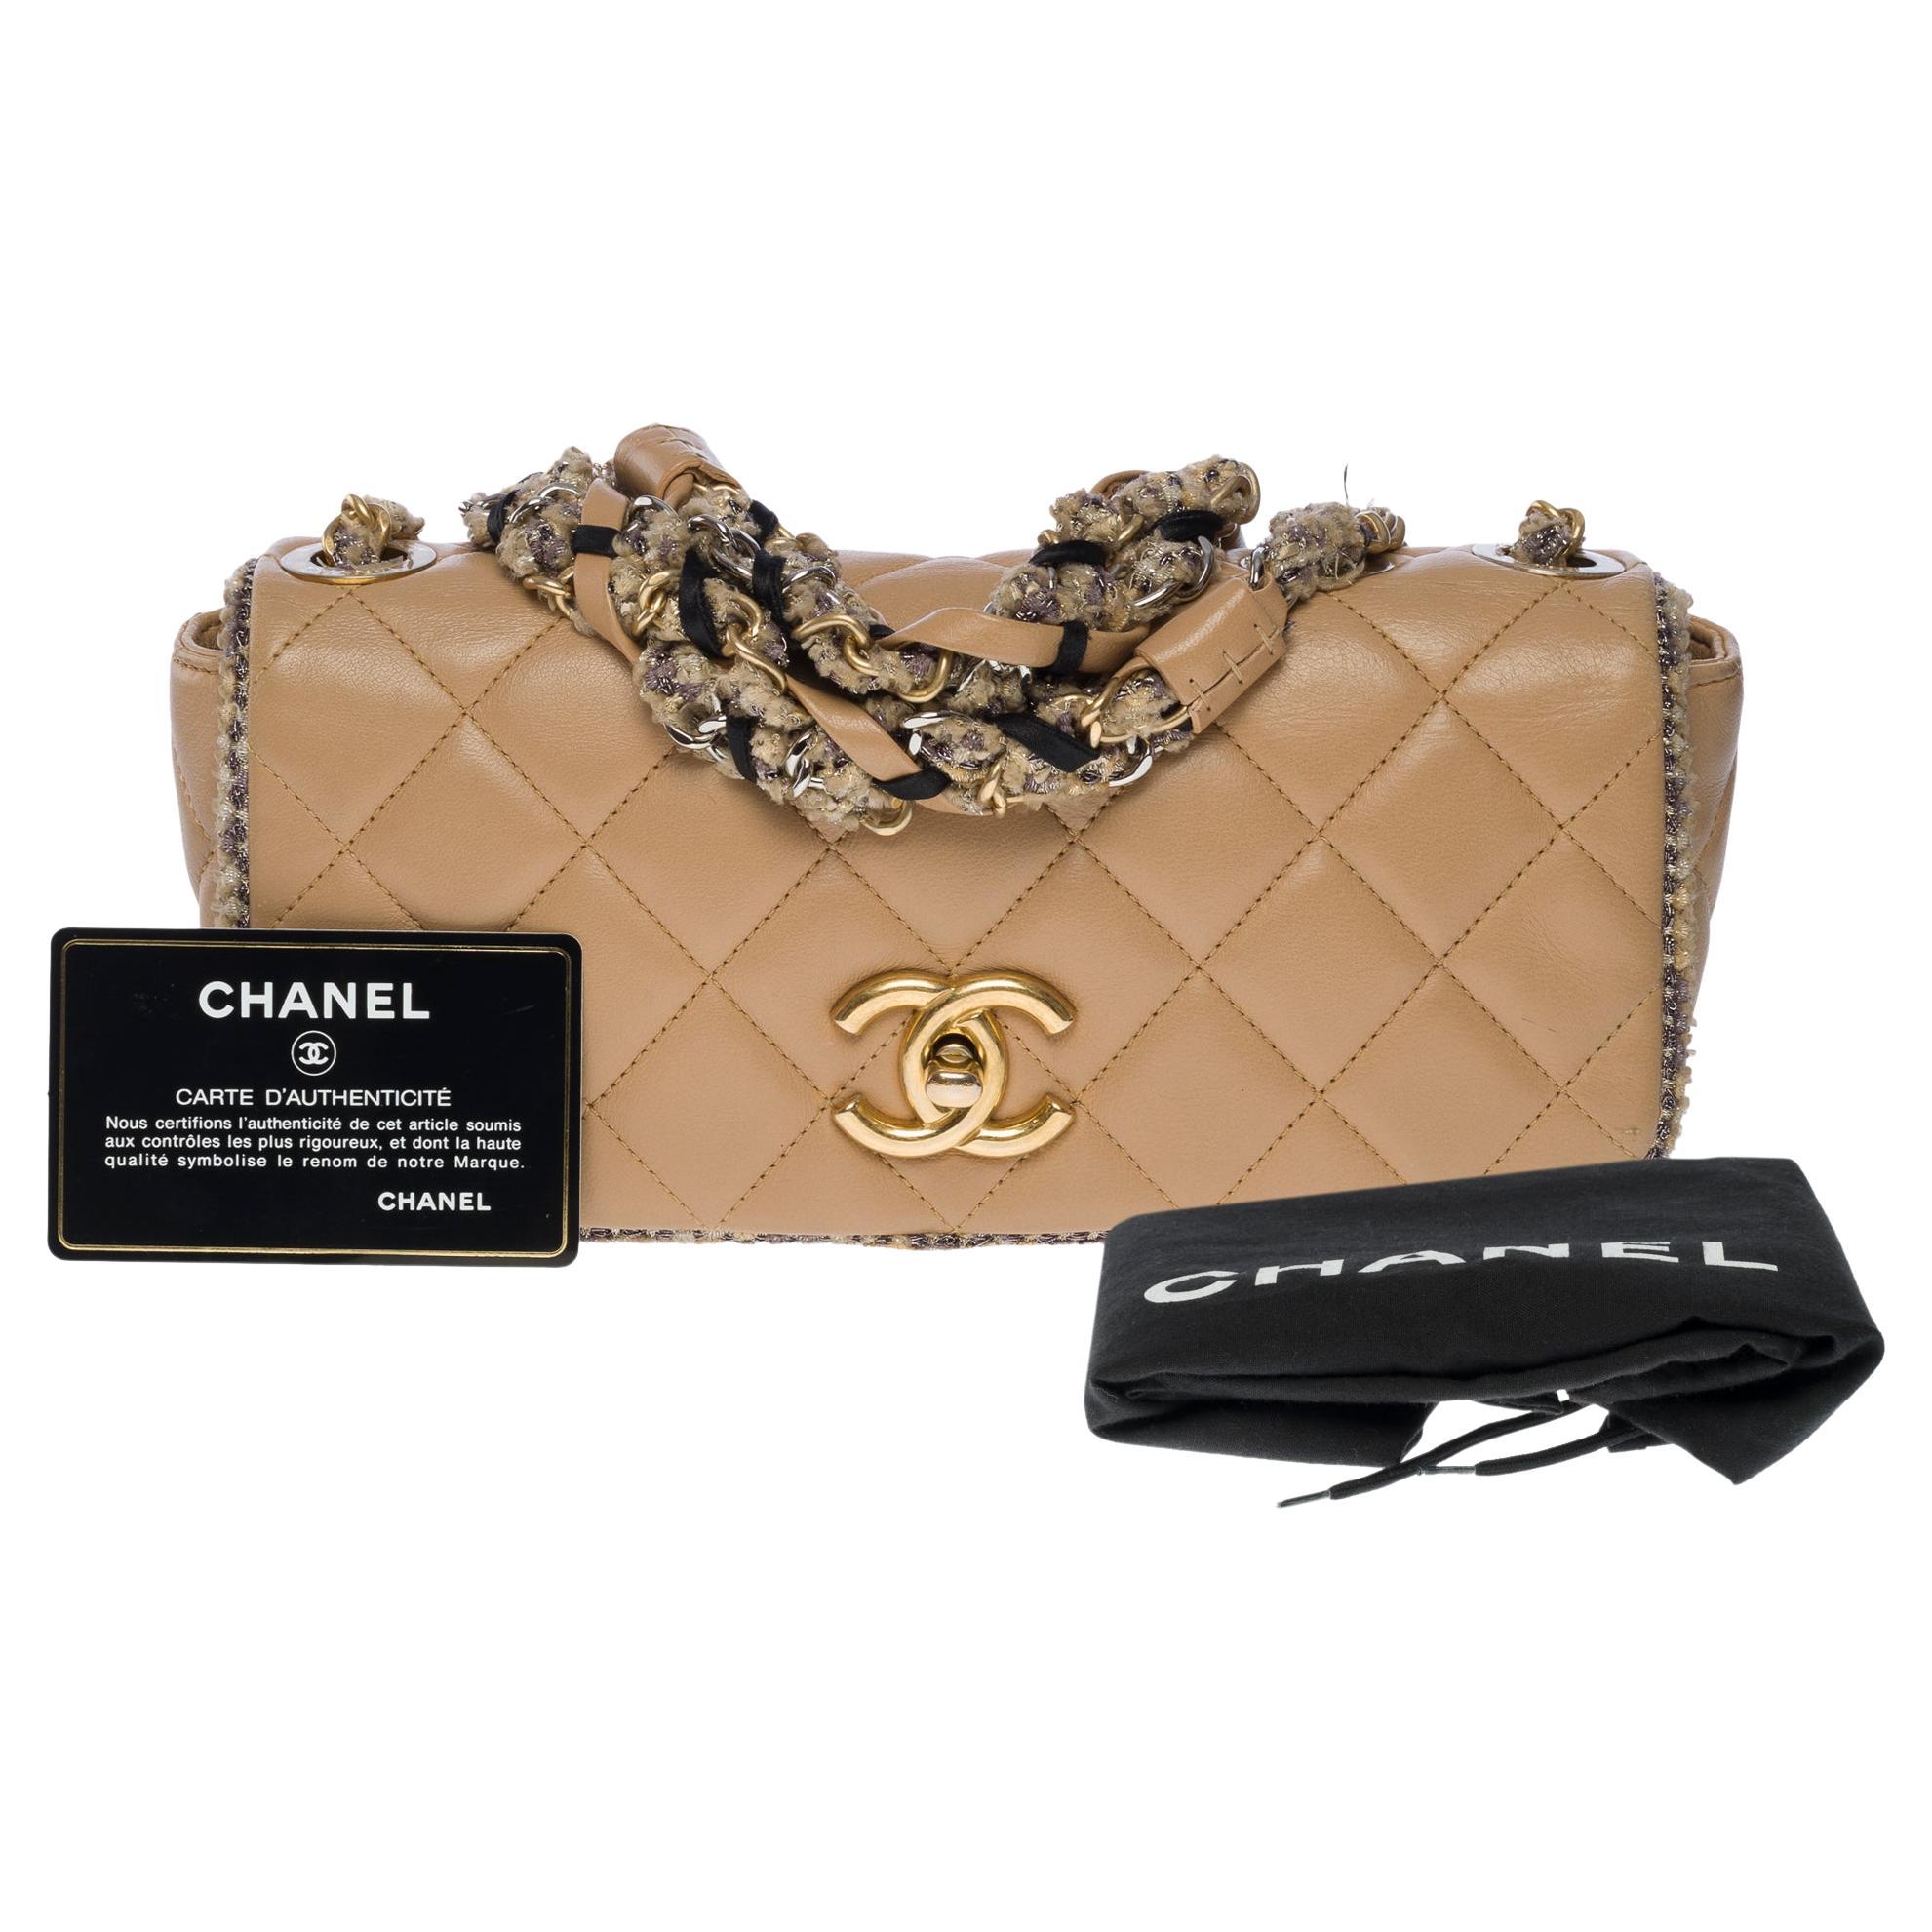 Rare Limited Edition Chanel Full Flap Shoulder Bag in Beige Quilted Lambskin, GHW